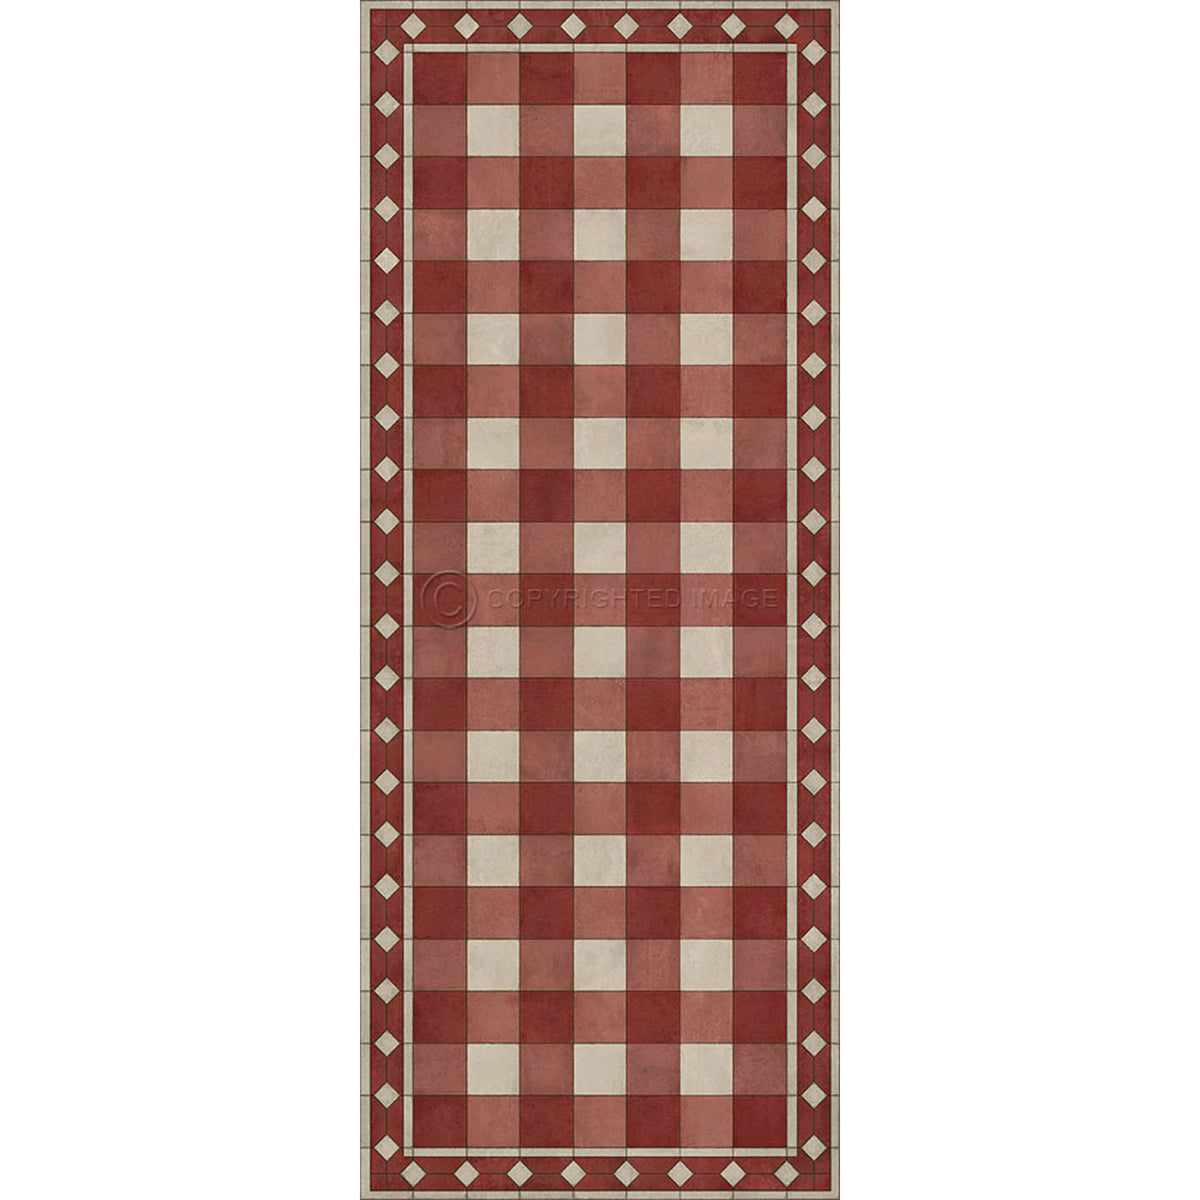 Gingham Tile Red 36x90